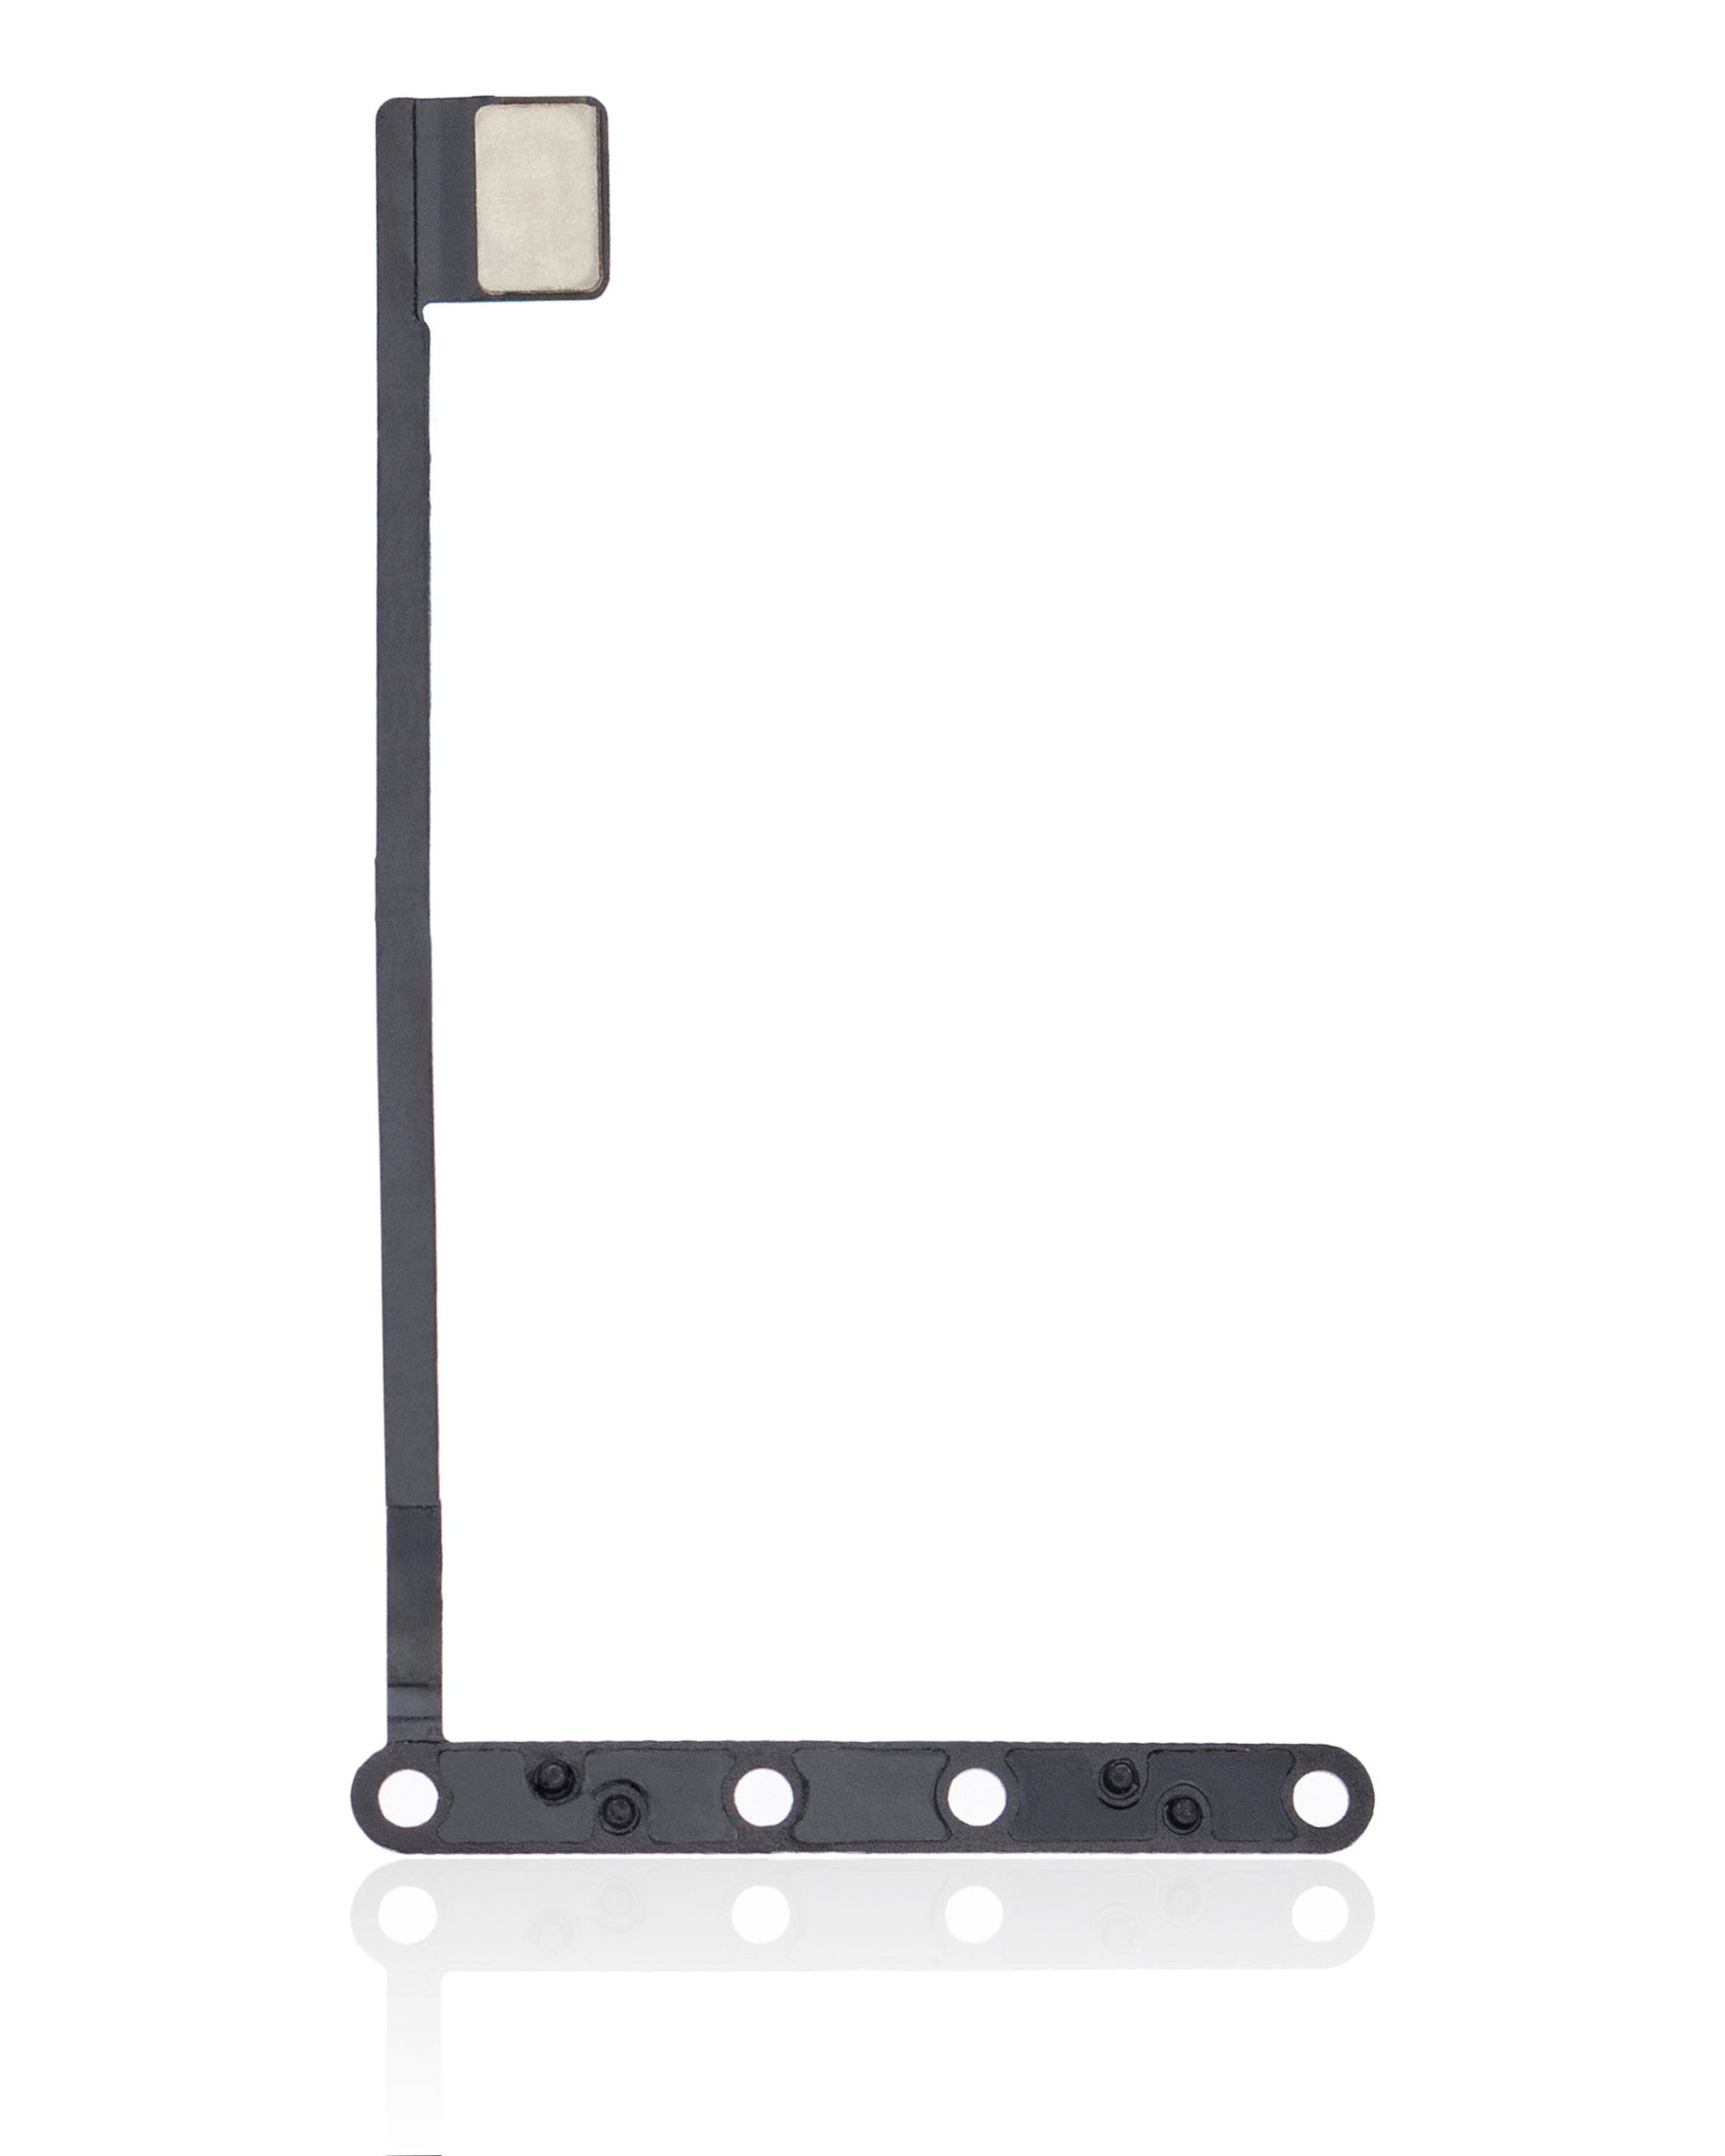 VOLOME BUTTON FLEX CABLE (WIFI VERSION) FOR IPAD PRO 11(2ND)/12.9(4TH)